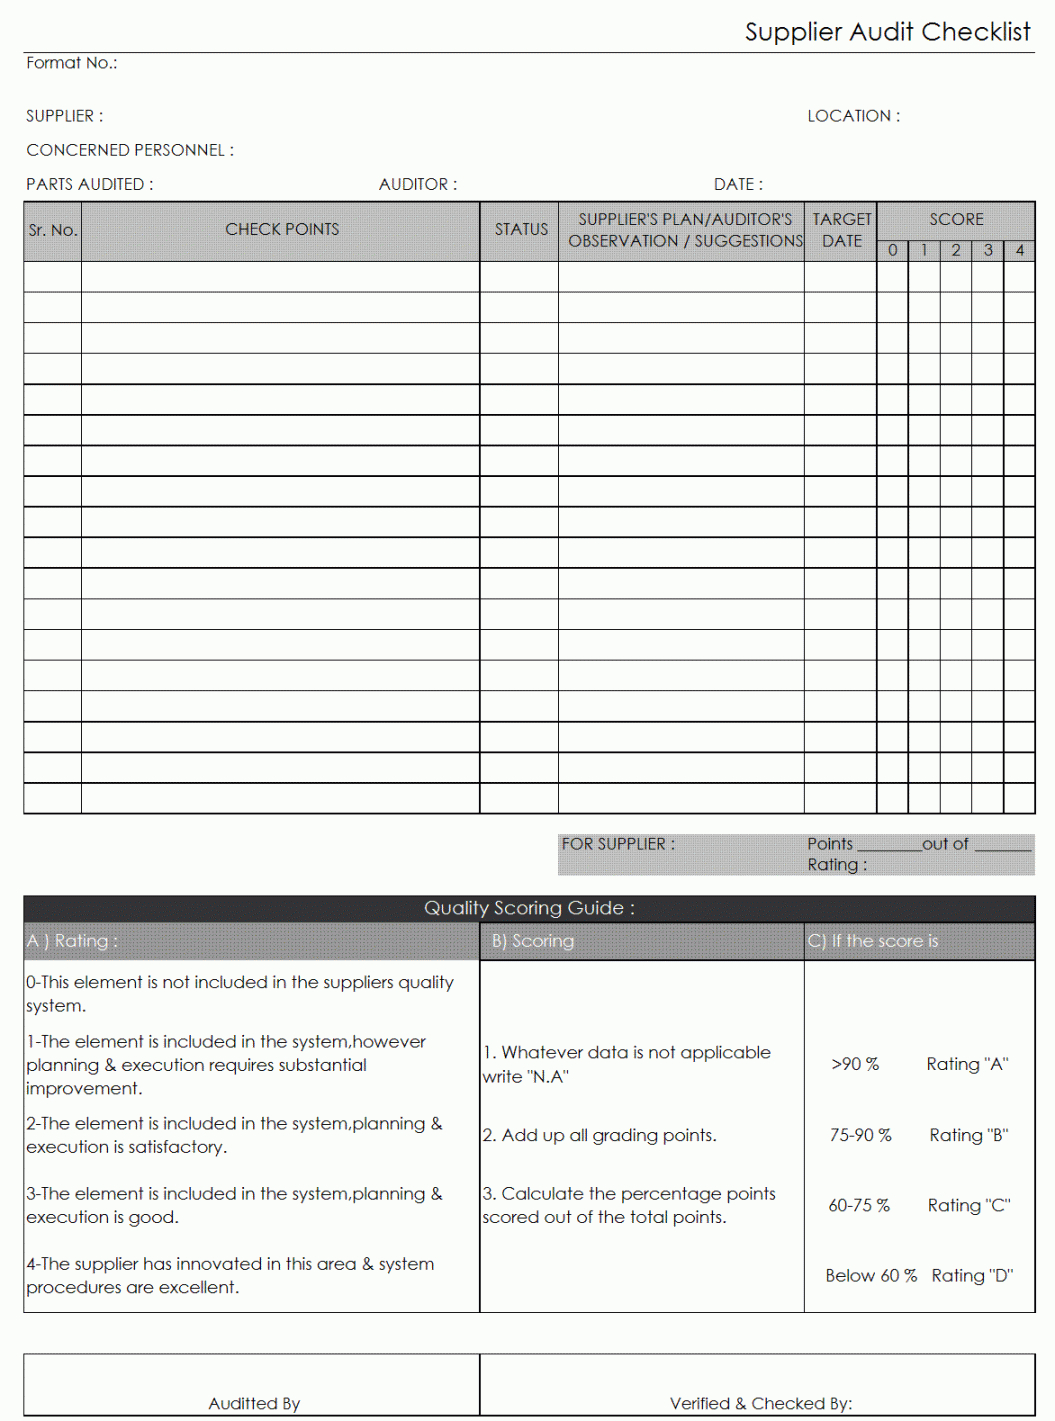 iso audit checklist supplier template samples excel xls for vendor audit checklist template samples